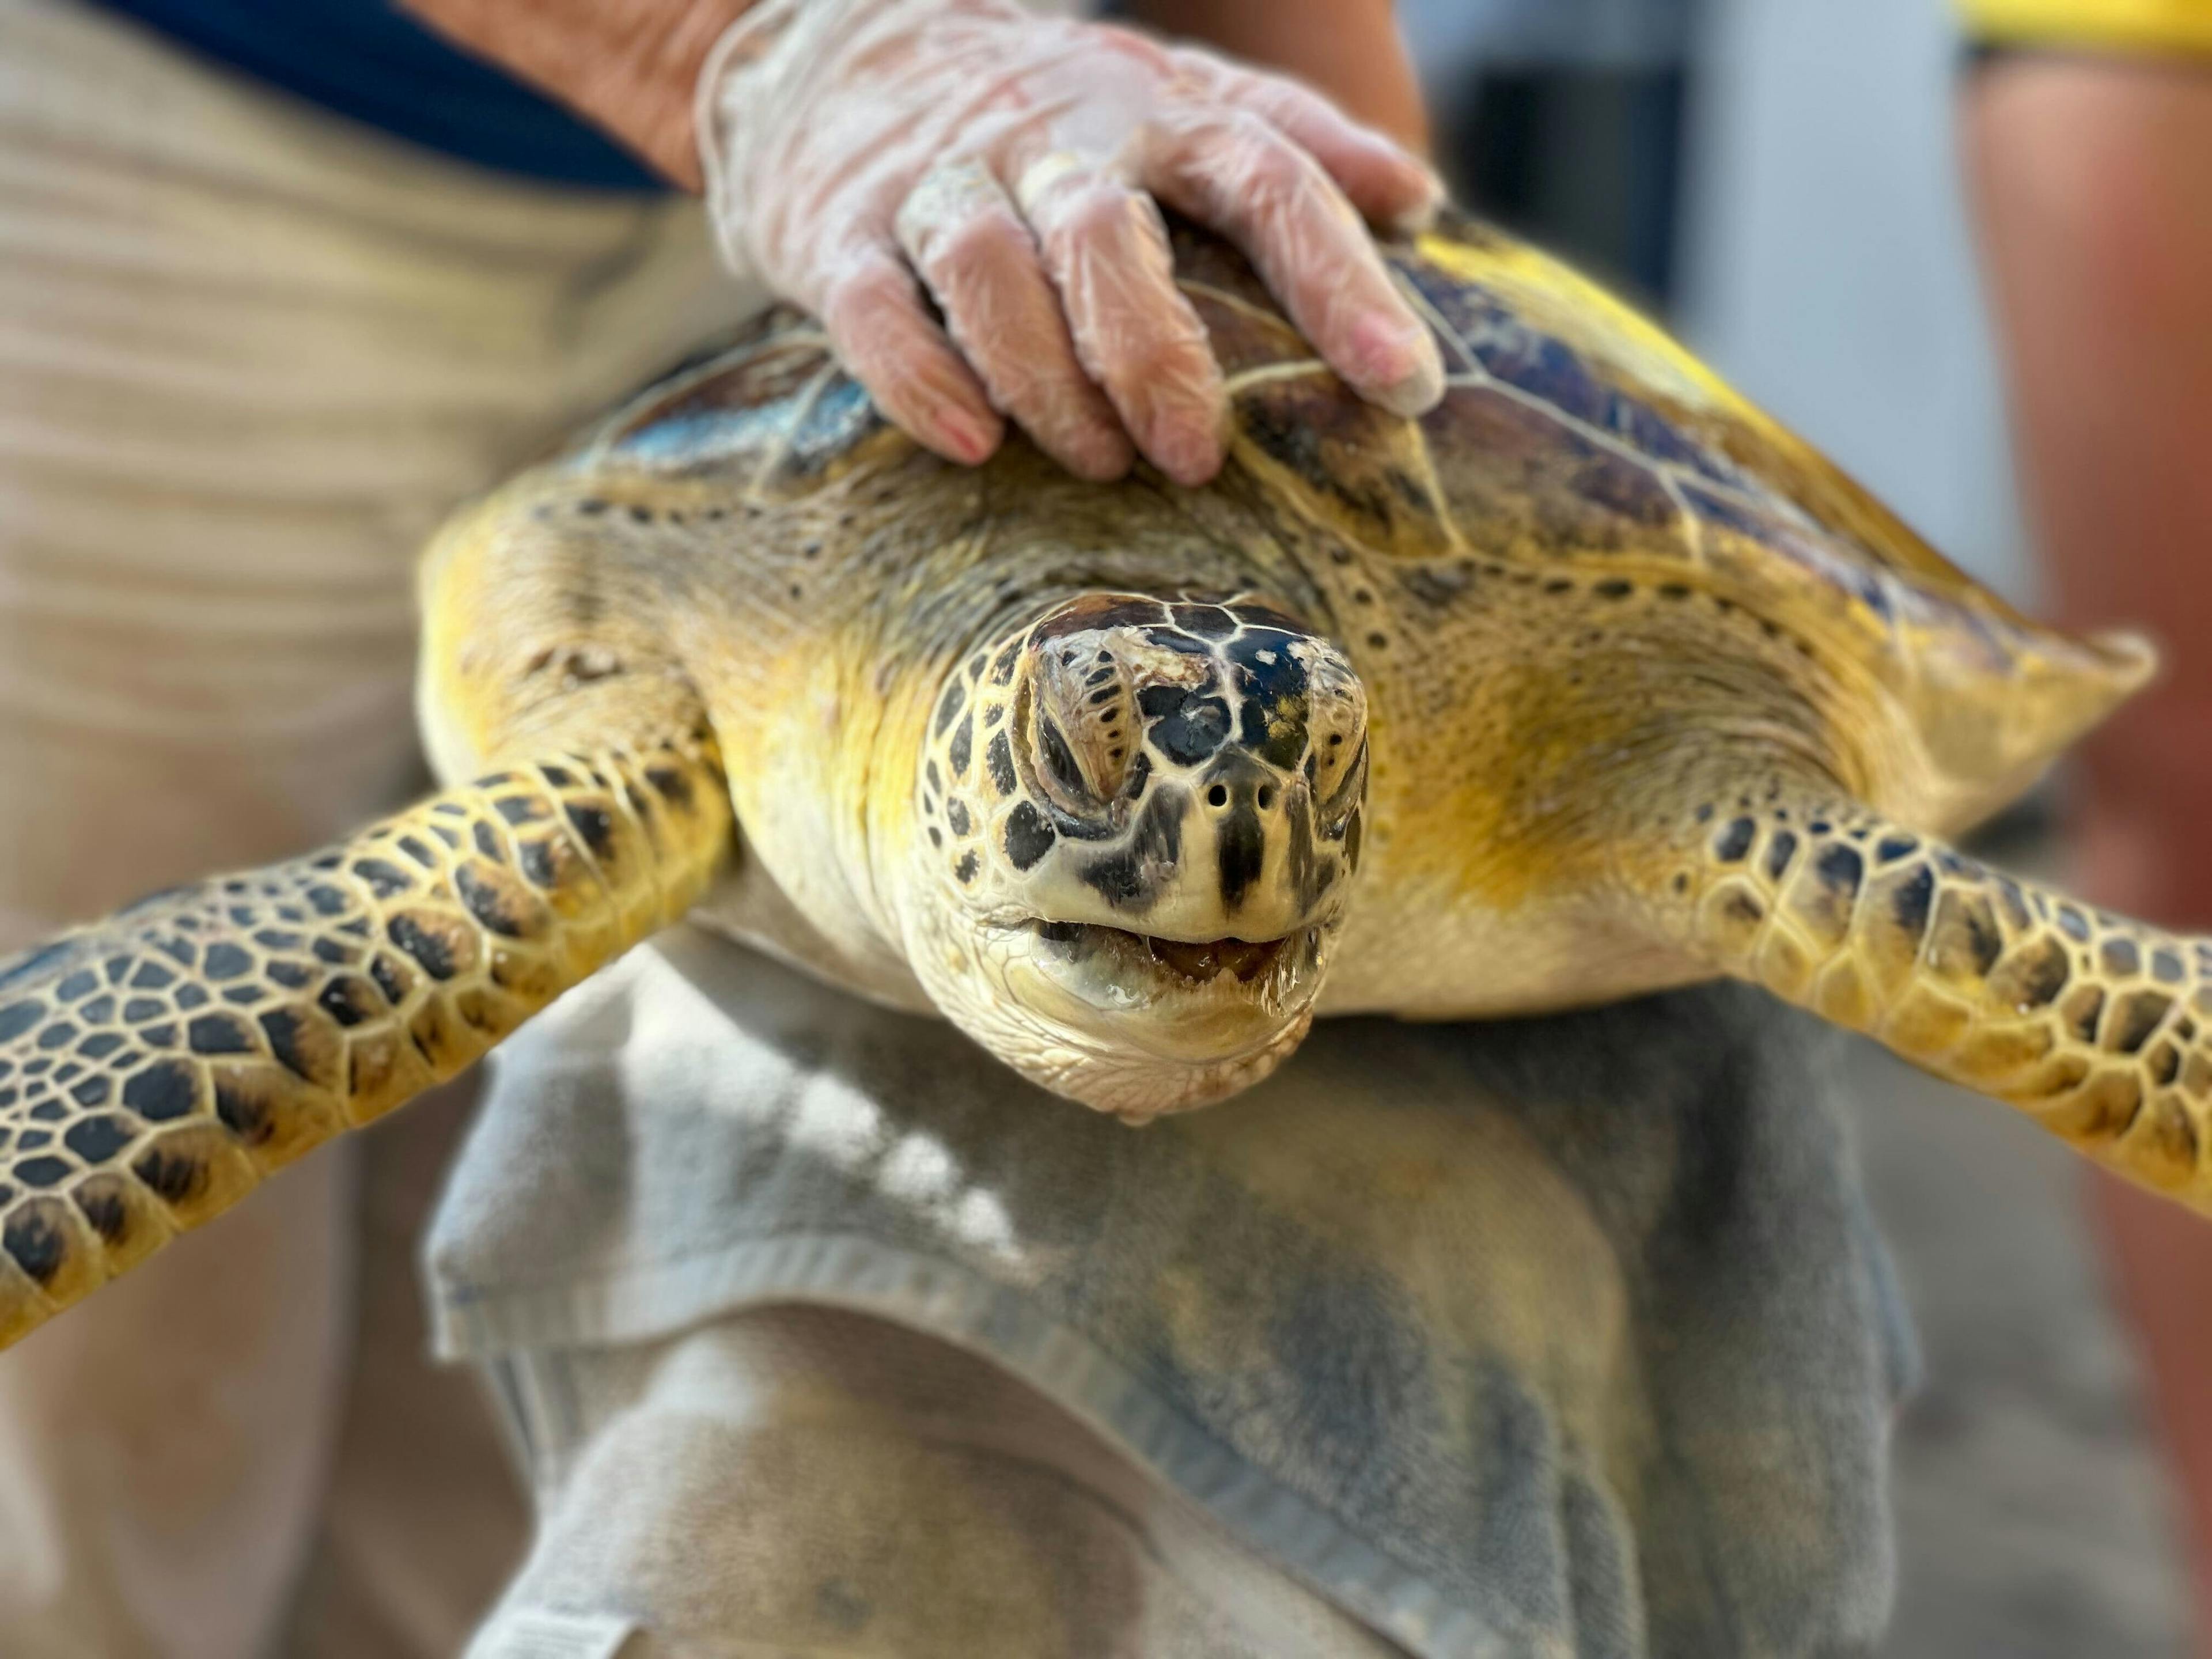 A rescued sea turtle. Photo provided by Moichor.